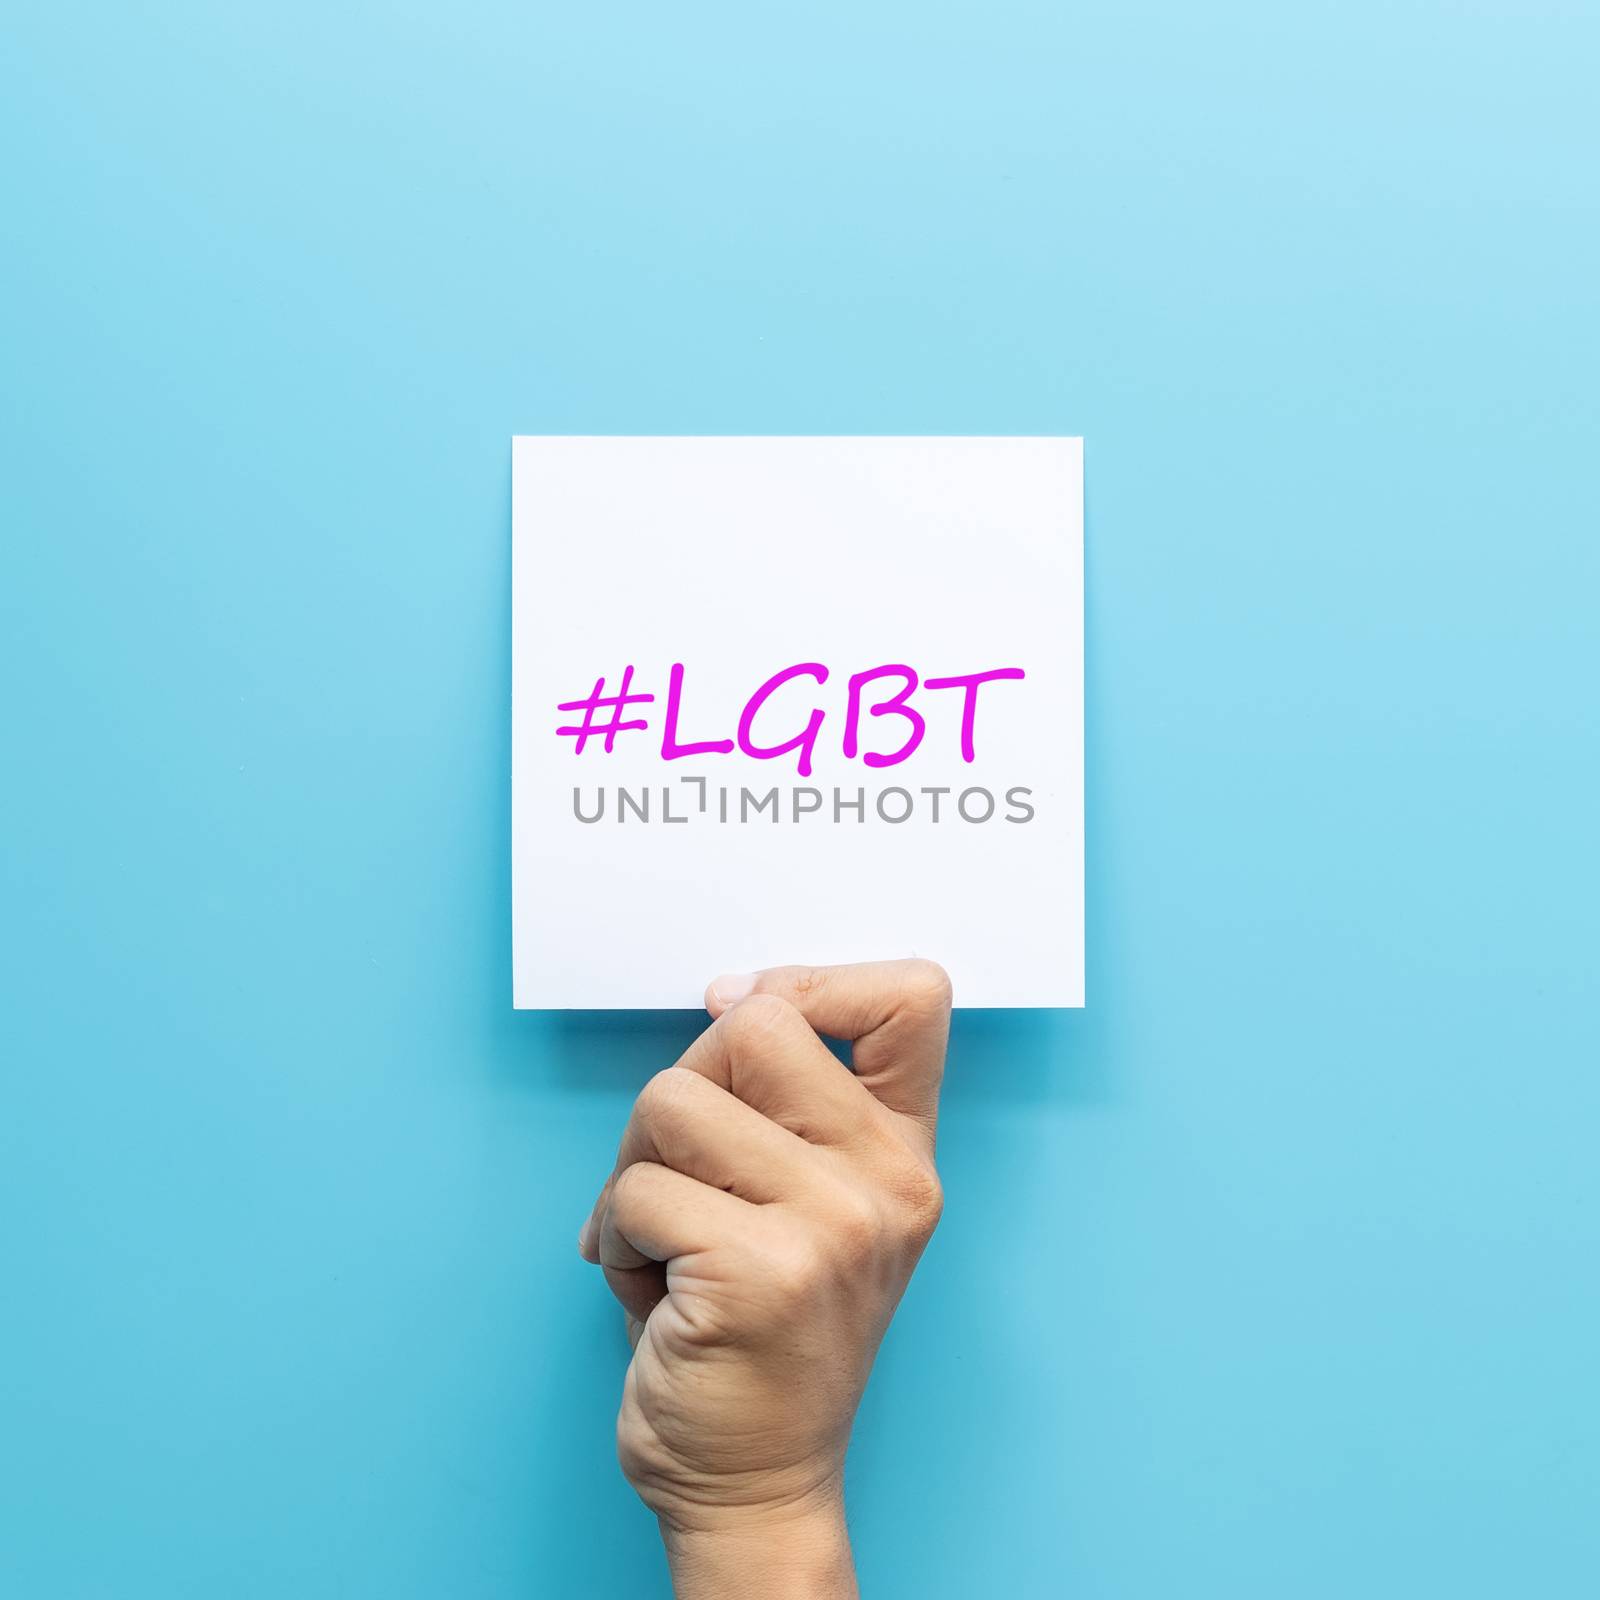 hashtag #LGBT on white paper in hand isolated on blue background